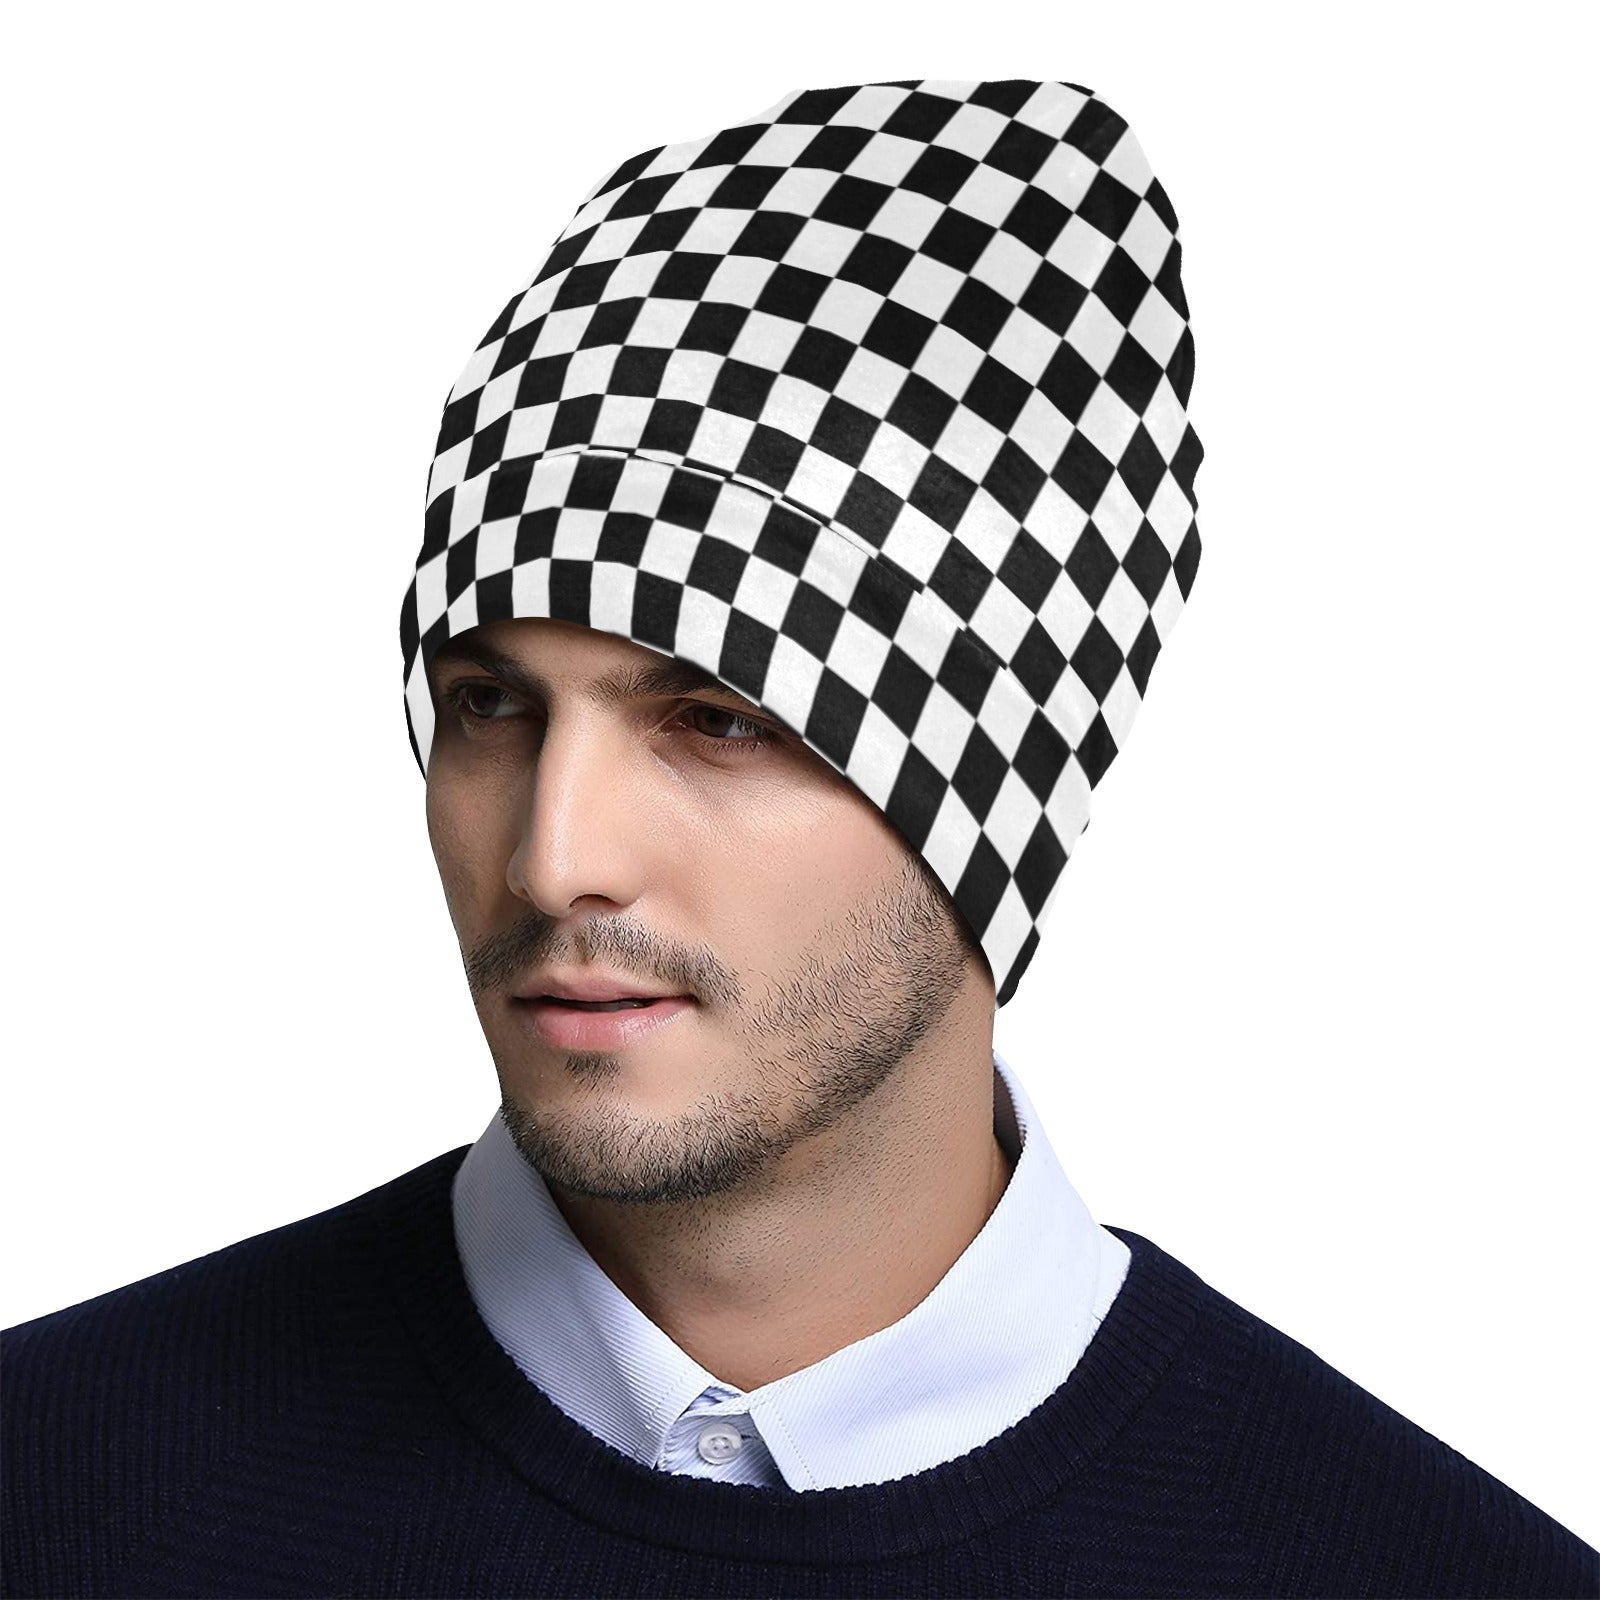 Checkered Beanie, Black White Check Checkerboard Soft Fleece Party Men Women Cute Stretchy Winter Adult Aesthetic Cap Hat Gift Starcove Fashion